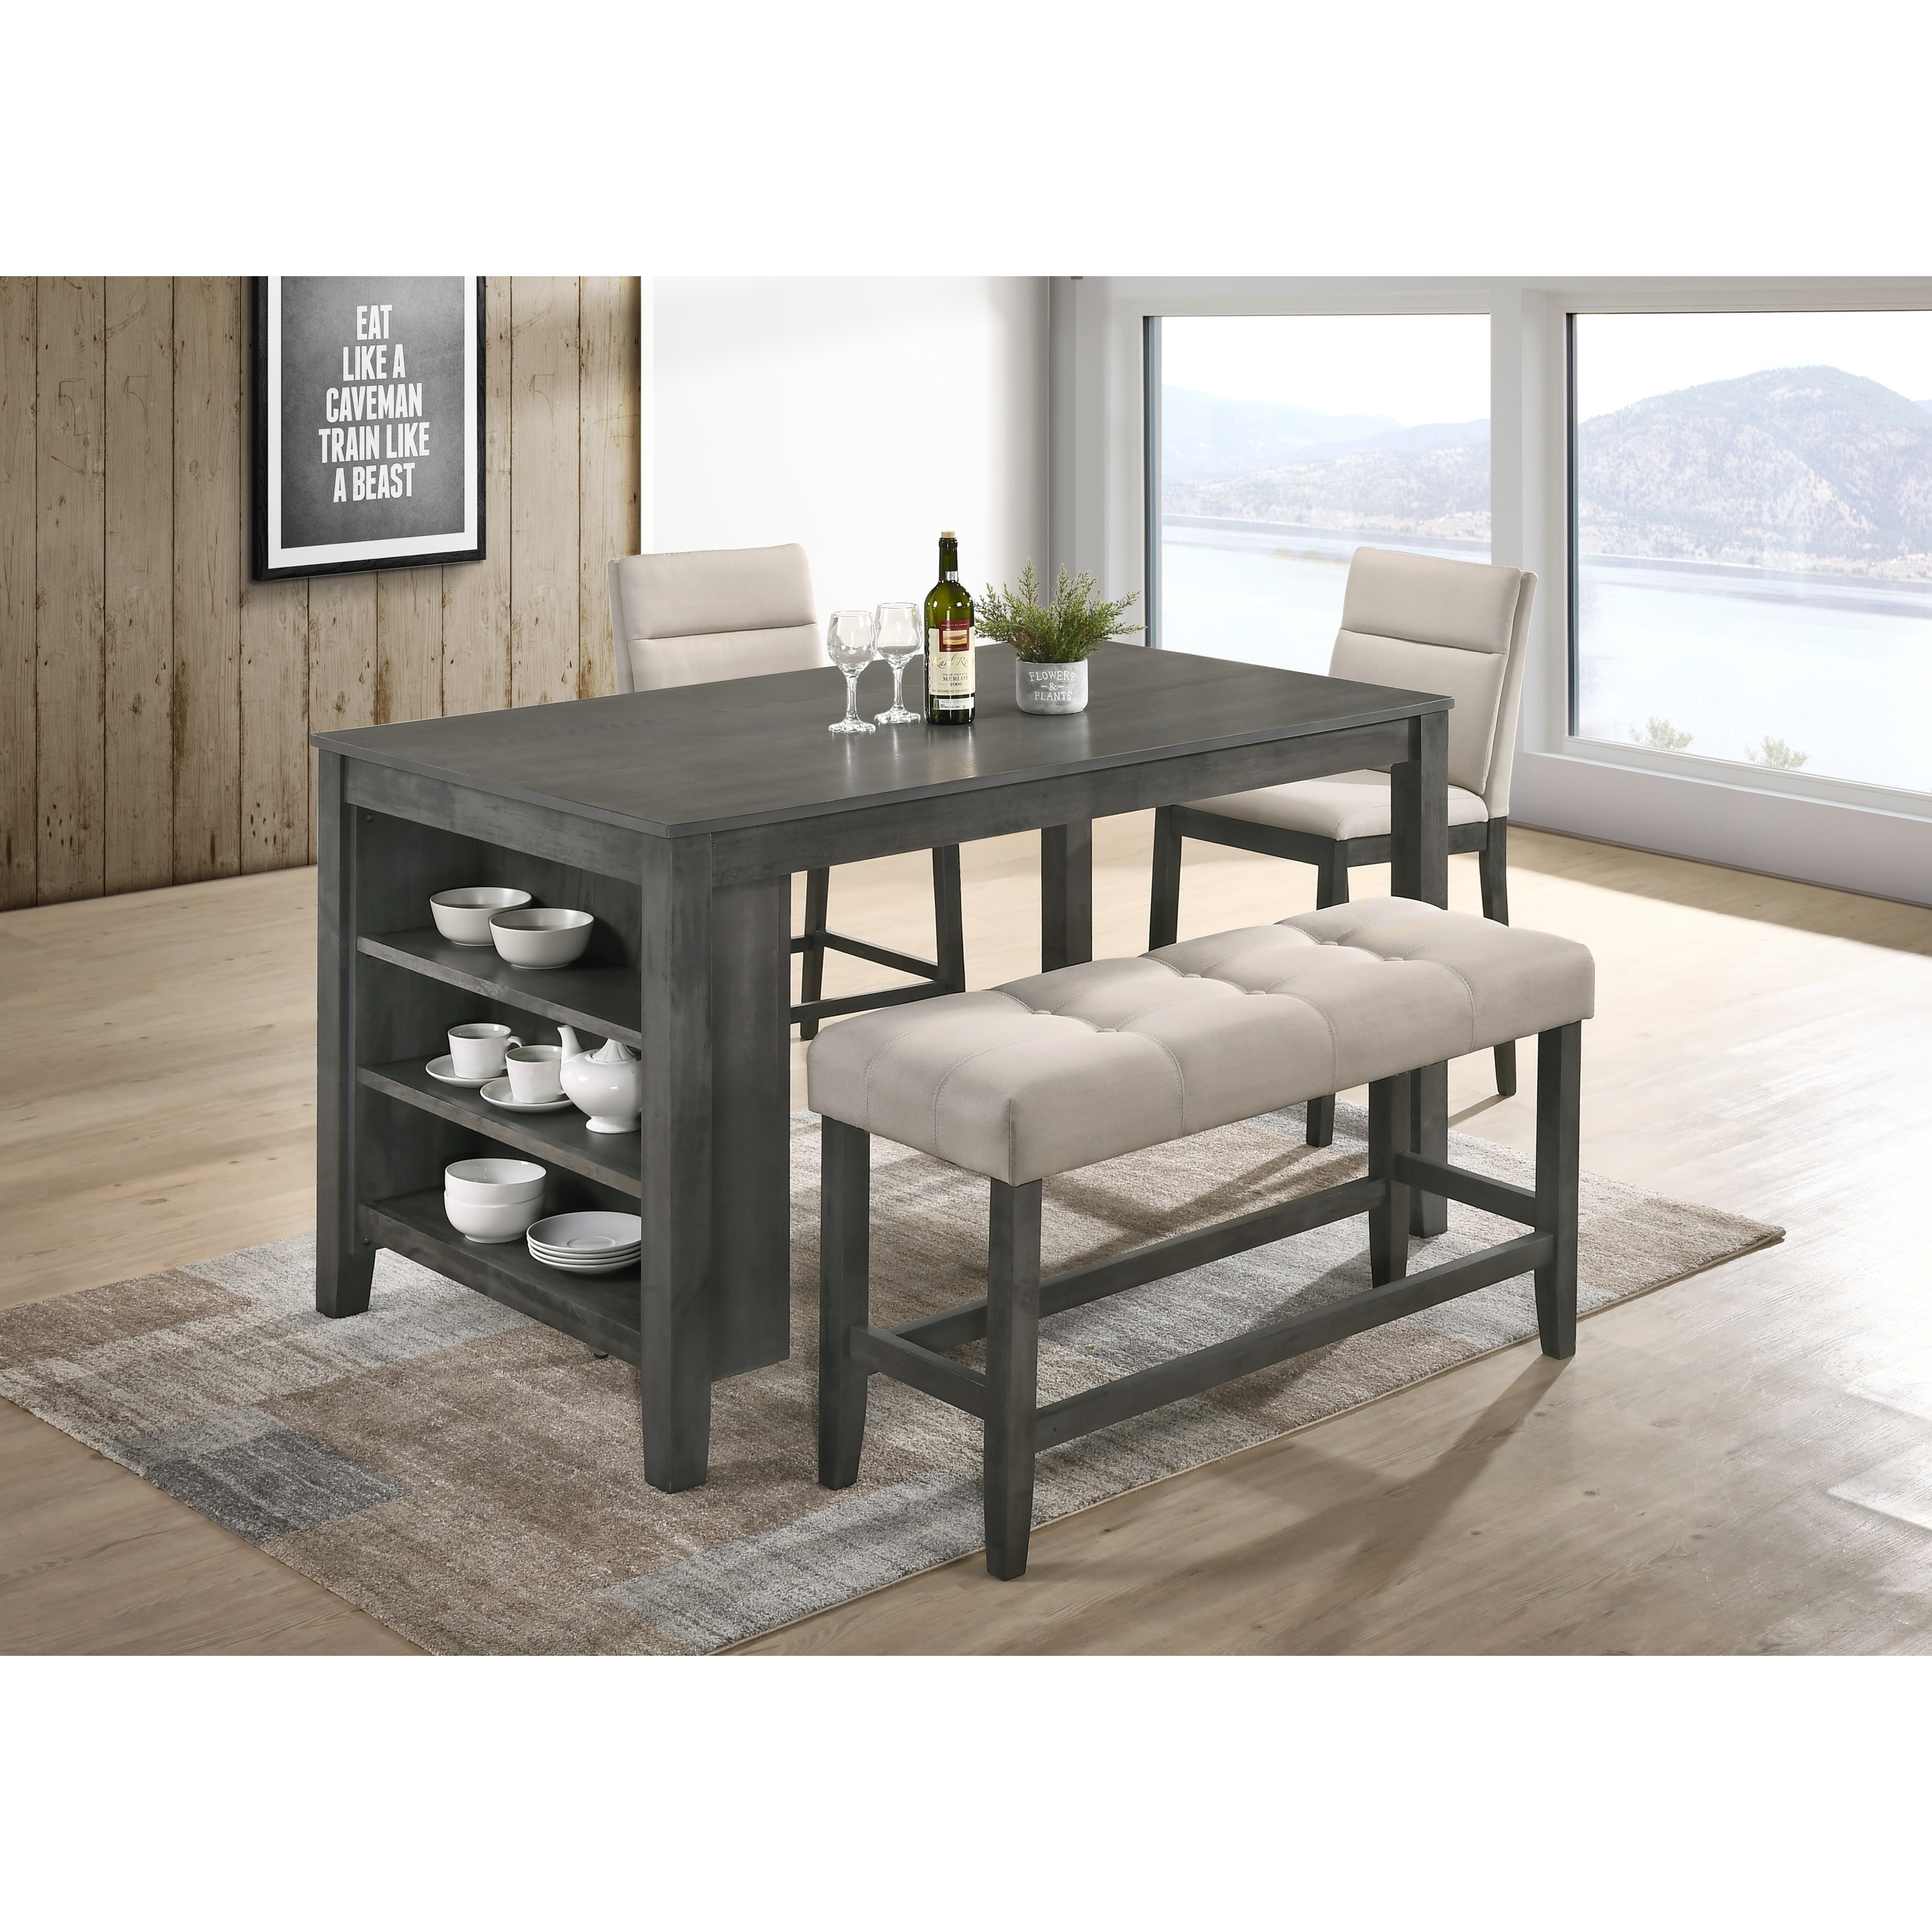 Best Quality Furniture Rustic Gray 4 Piece Counter Height Dining Set With 3 Shelf Storage Overstock 21295941